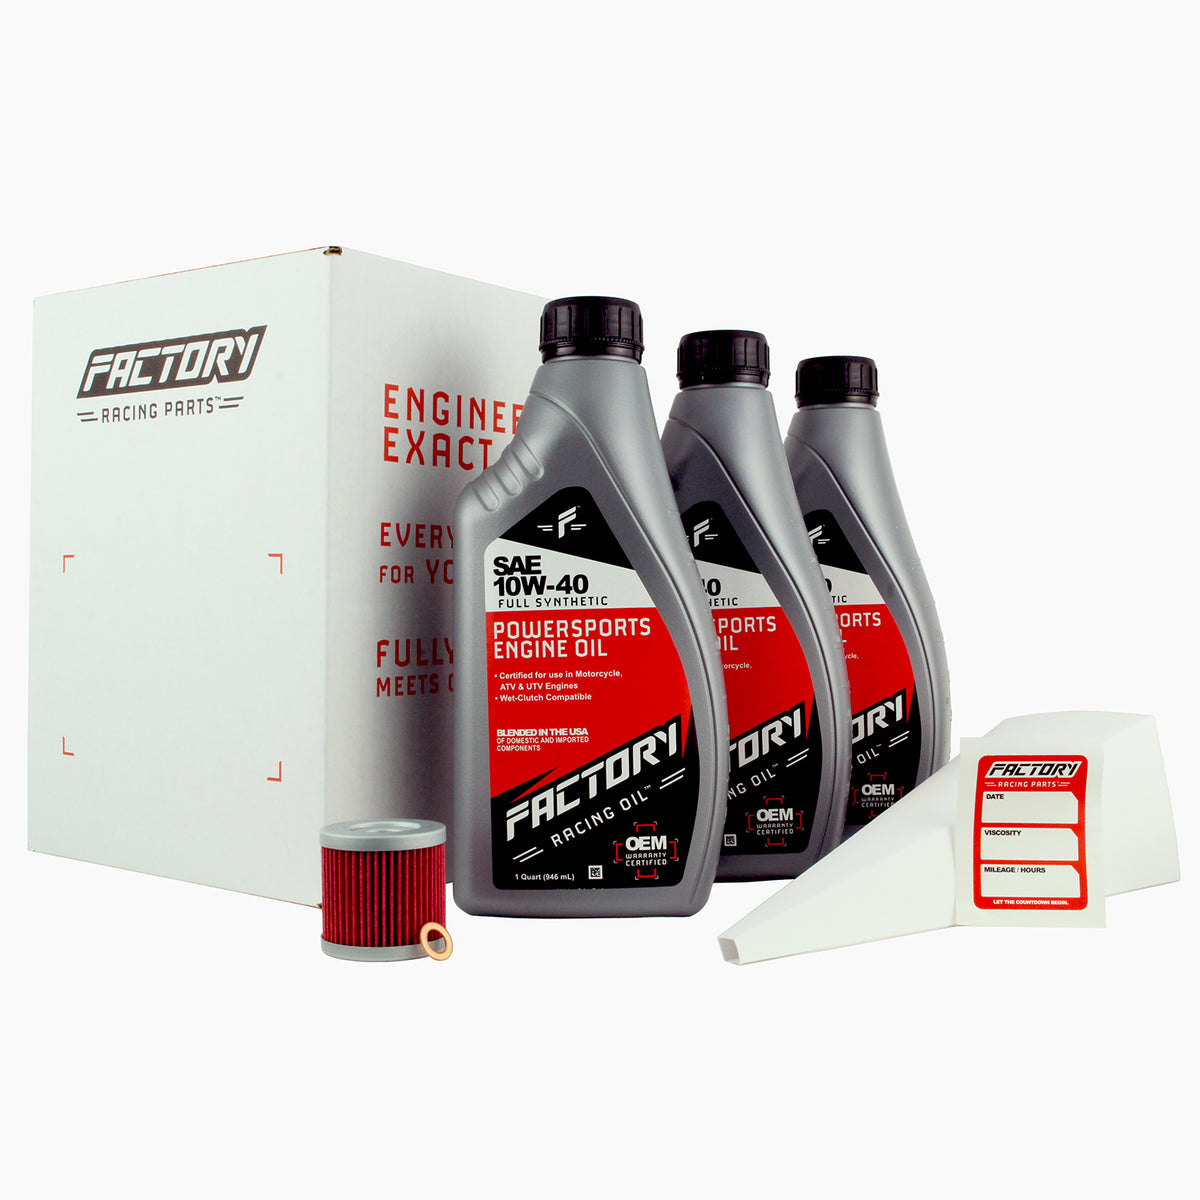 Factory Racing Parts SAE 10W-40 3 Quart Oil Change Kit For